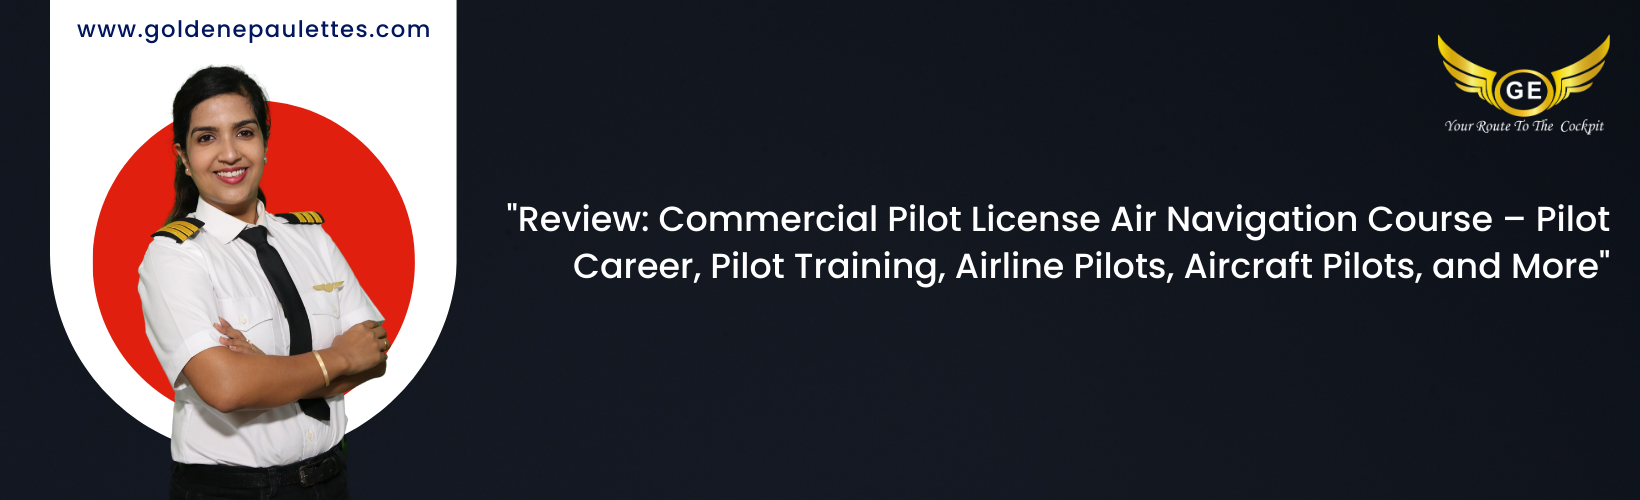 Review of Air Navigation Course